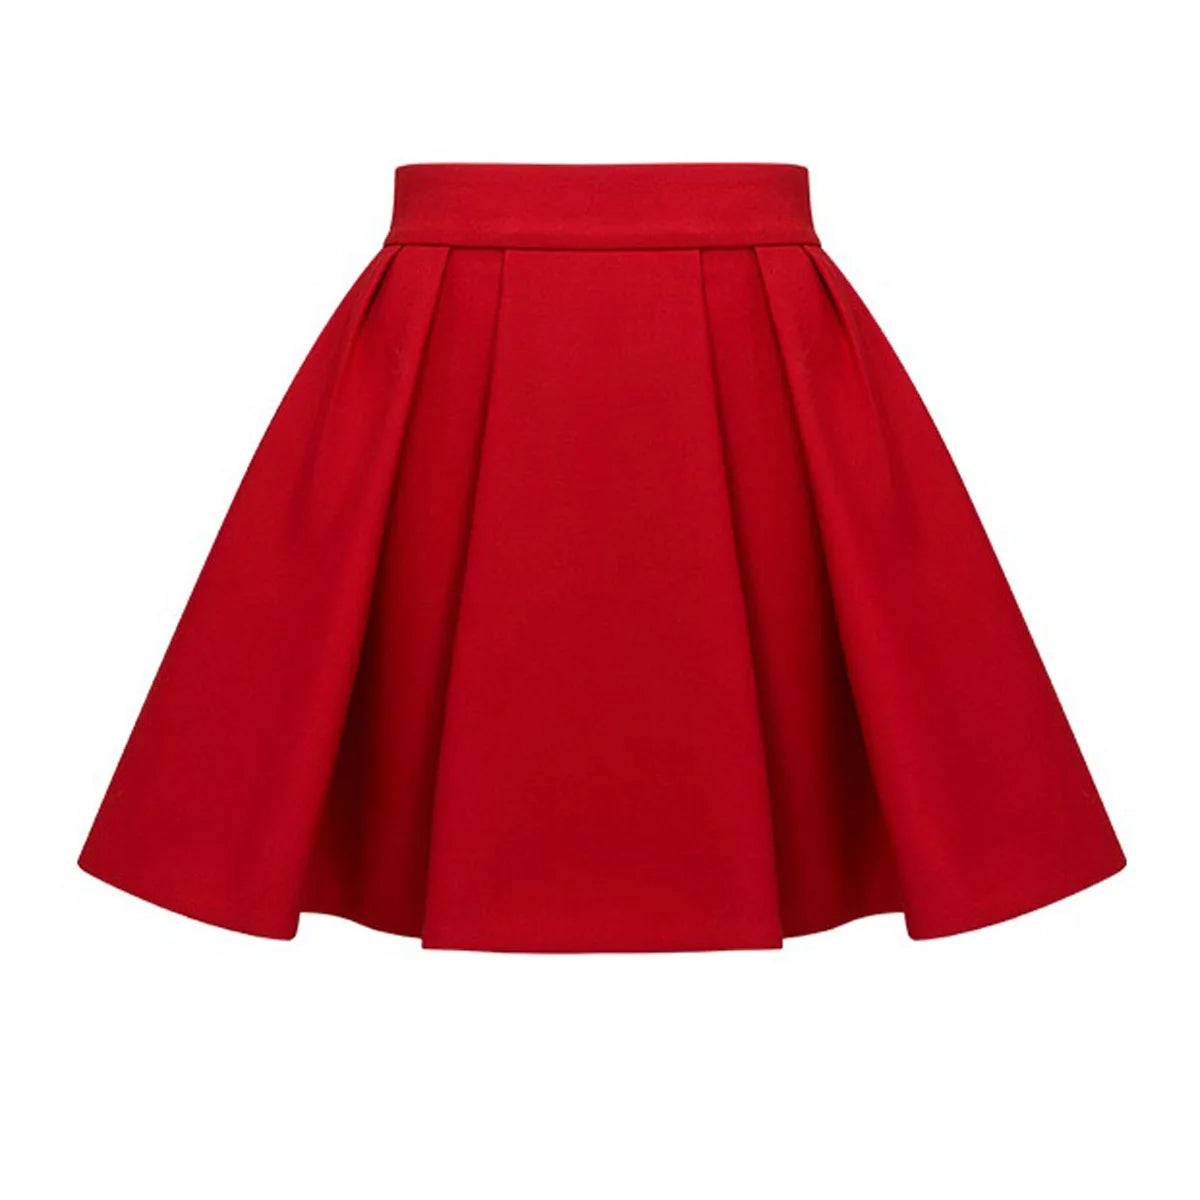 a red skirt with a pleaed skirt